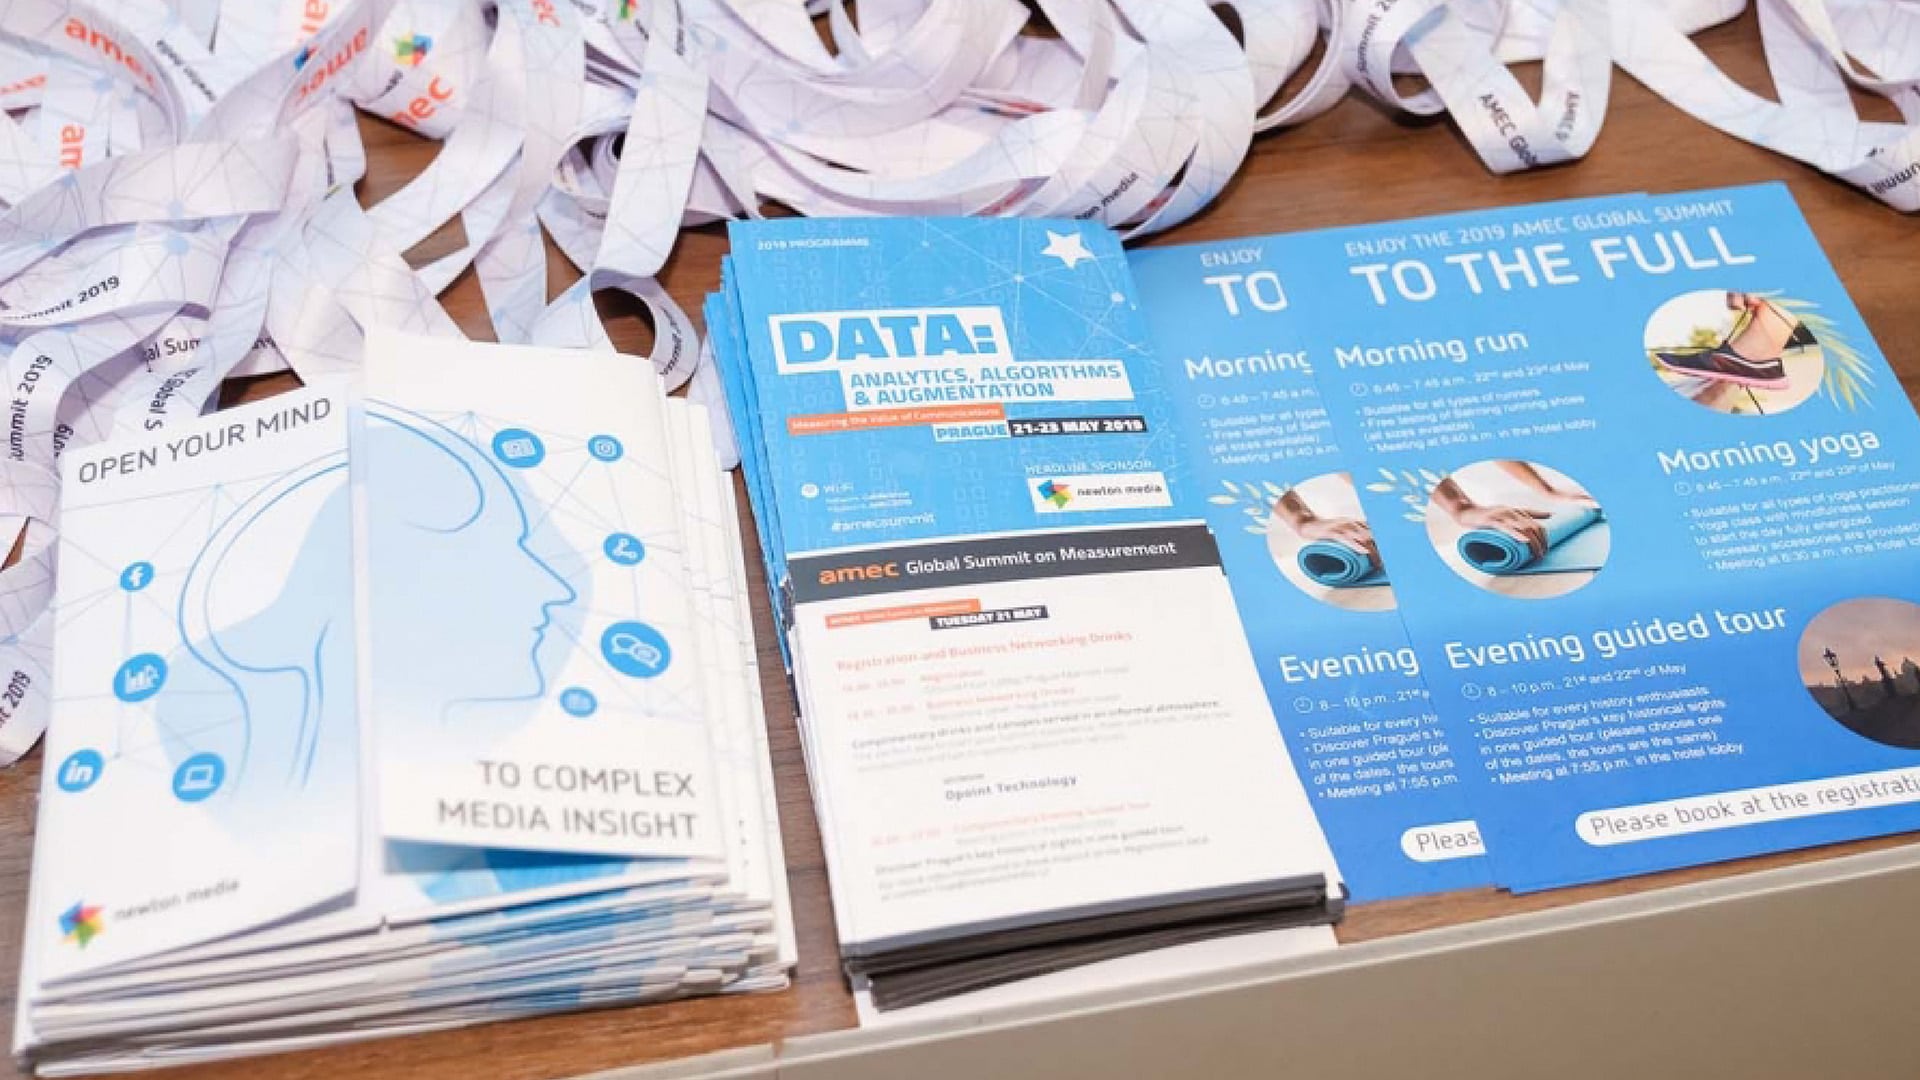 A photo of a stack of flyers and brochures for the Association for the Measurement and Evaluation of Communication AMEC Global Summit Programme